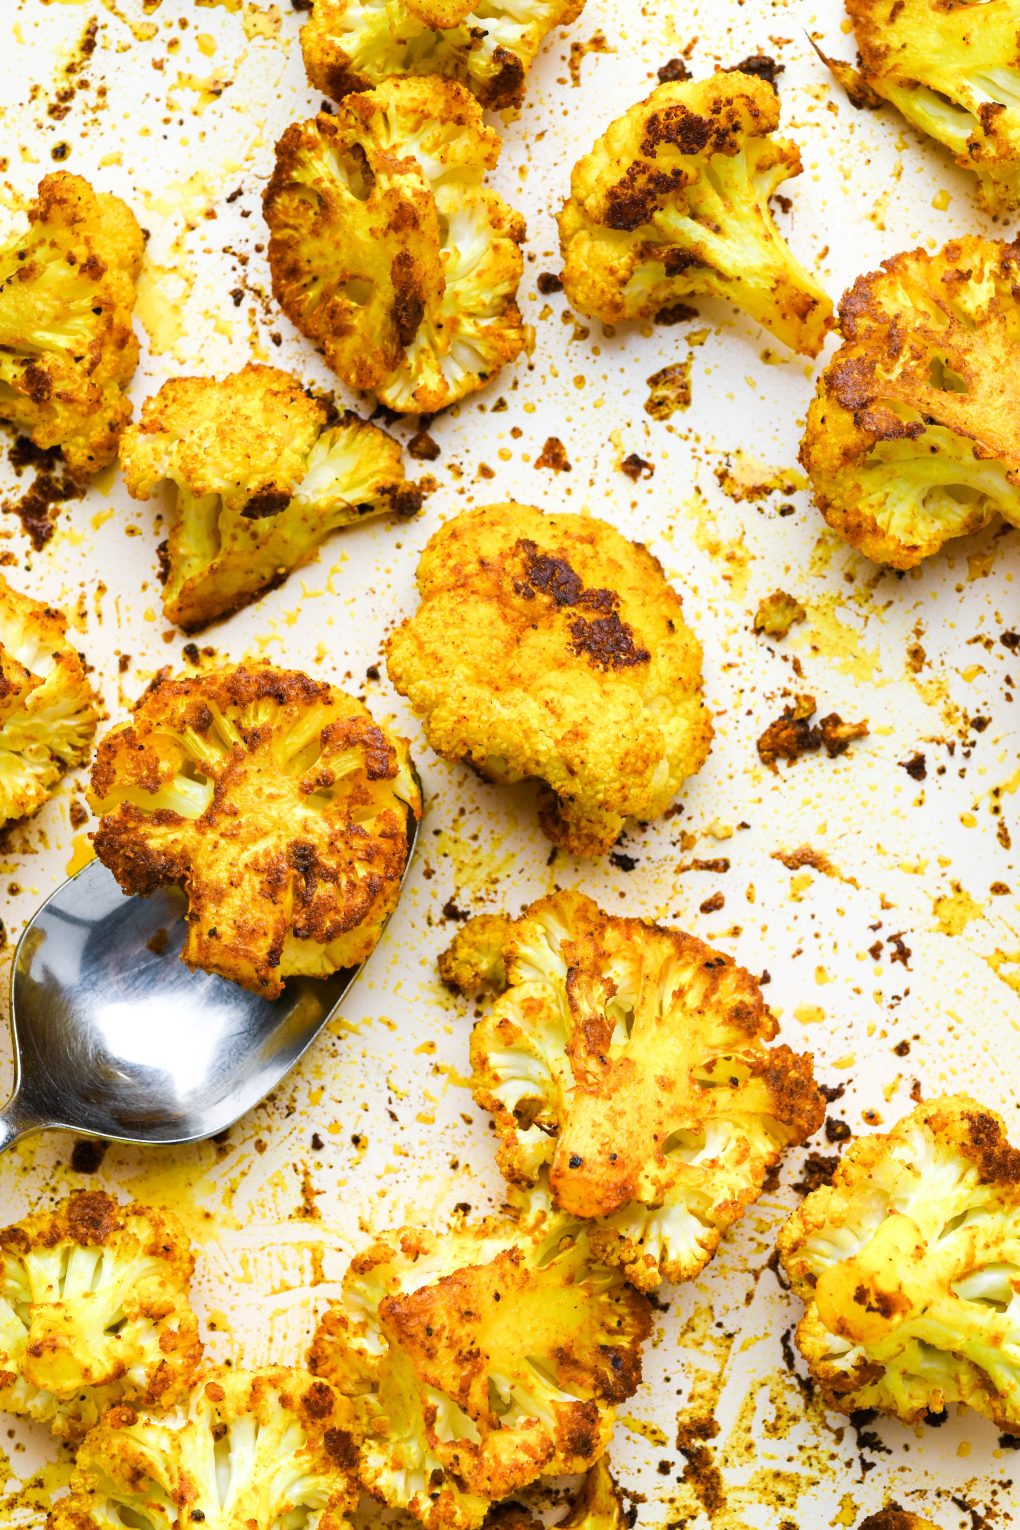 Turmeric roasted cauliflower on a white baking sheet with a metal spoon scooping up a single piece of caramelized cauliflower.